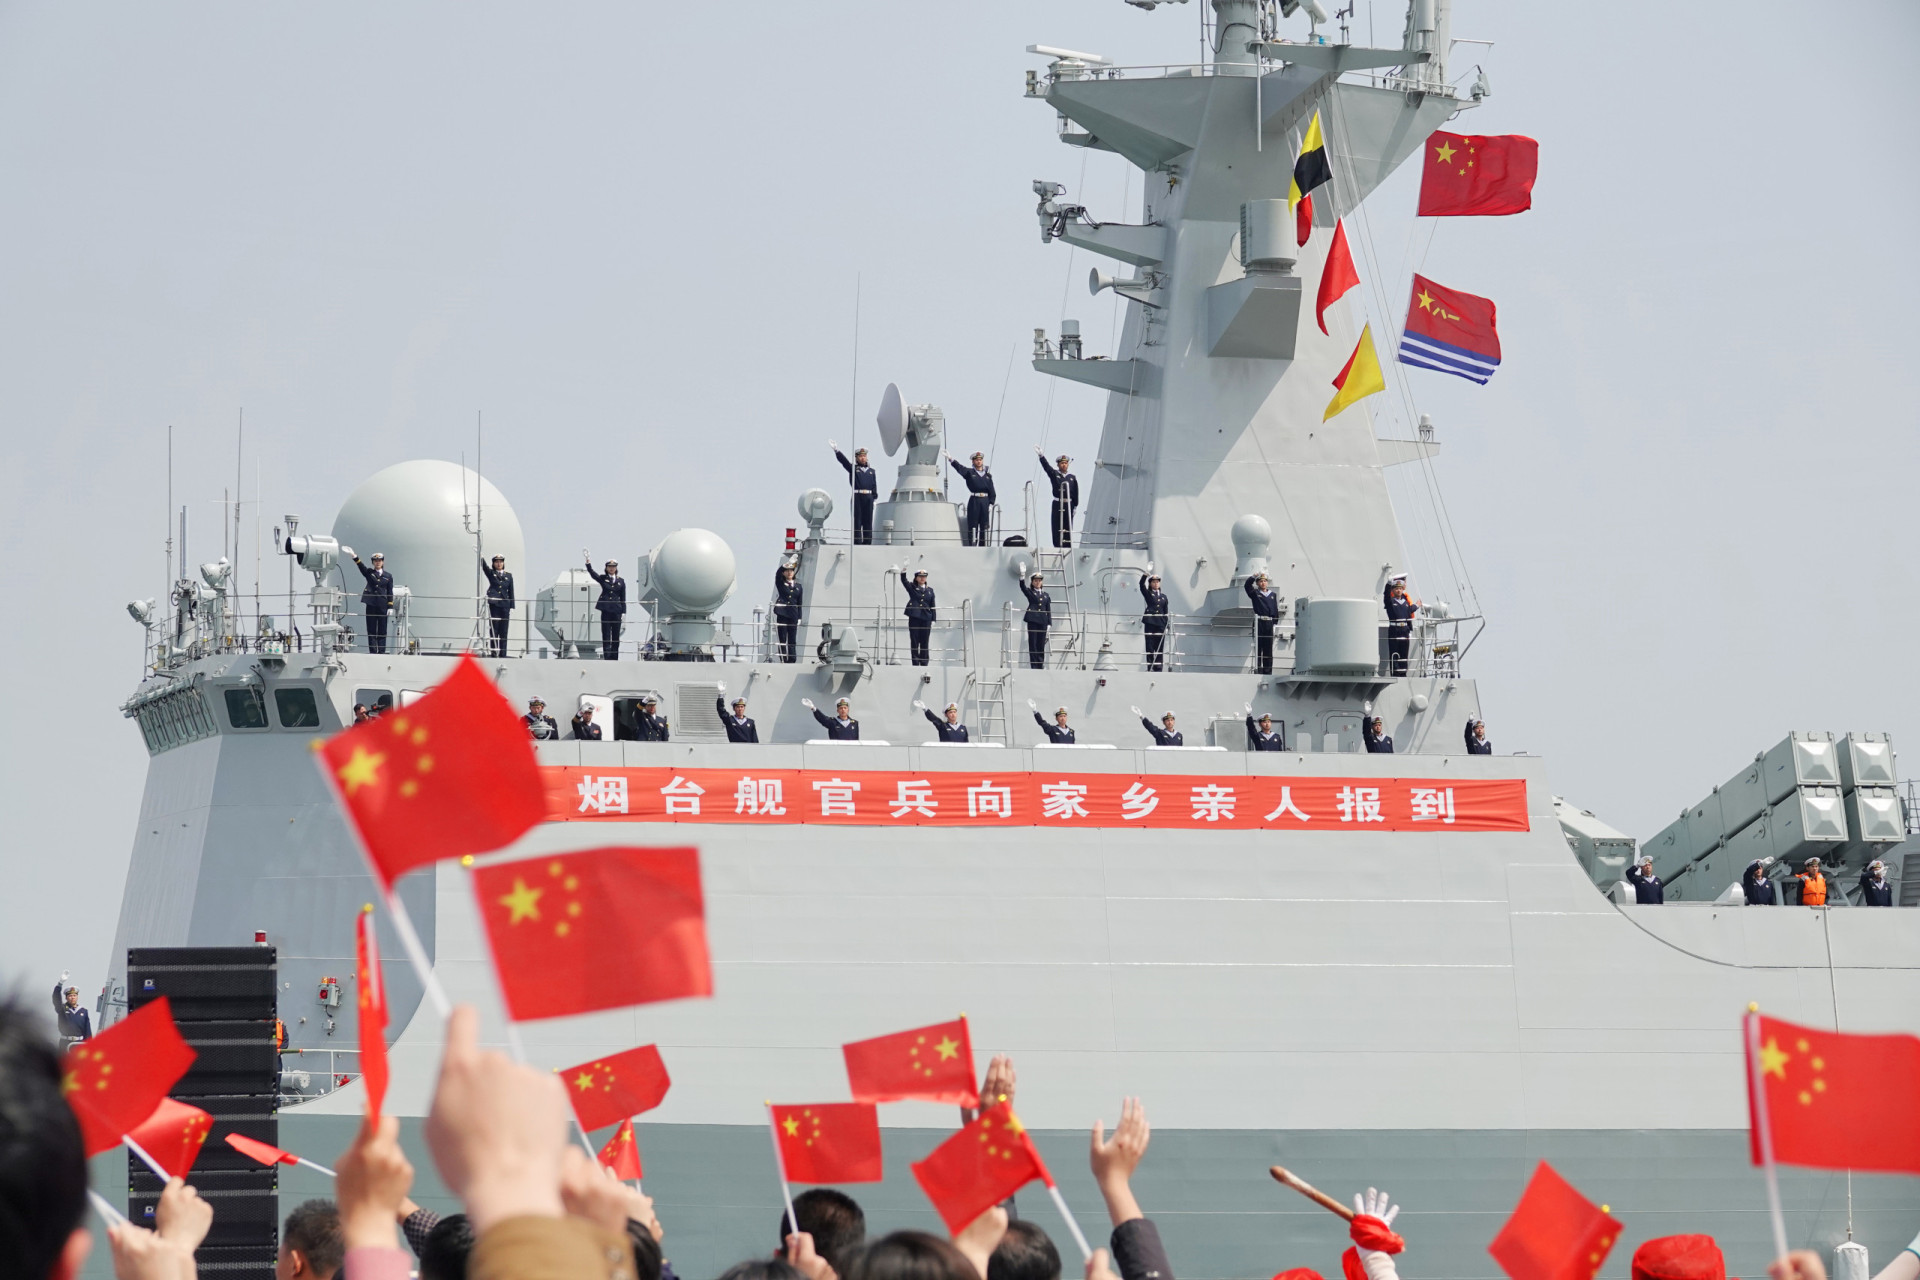 <p>The "naval battle" could be referring to China's tensions with Taiwan. Beijing currently has the largest navy in the world.</p><p>You may also like:<a href="https://www.starsinsider.com/n/469604?utm_source=msn.com&utm_medium=display&utm_campaign=referral_description&utm_content=638526en-us"> The most popular names the year you were born</a></p>